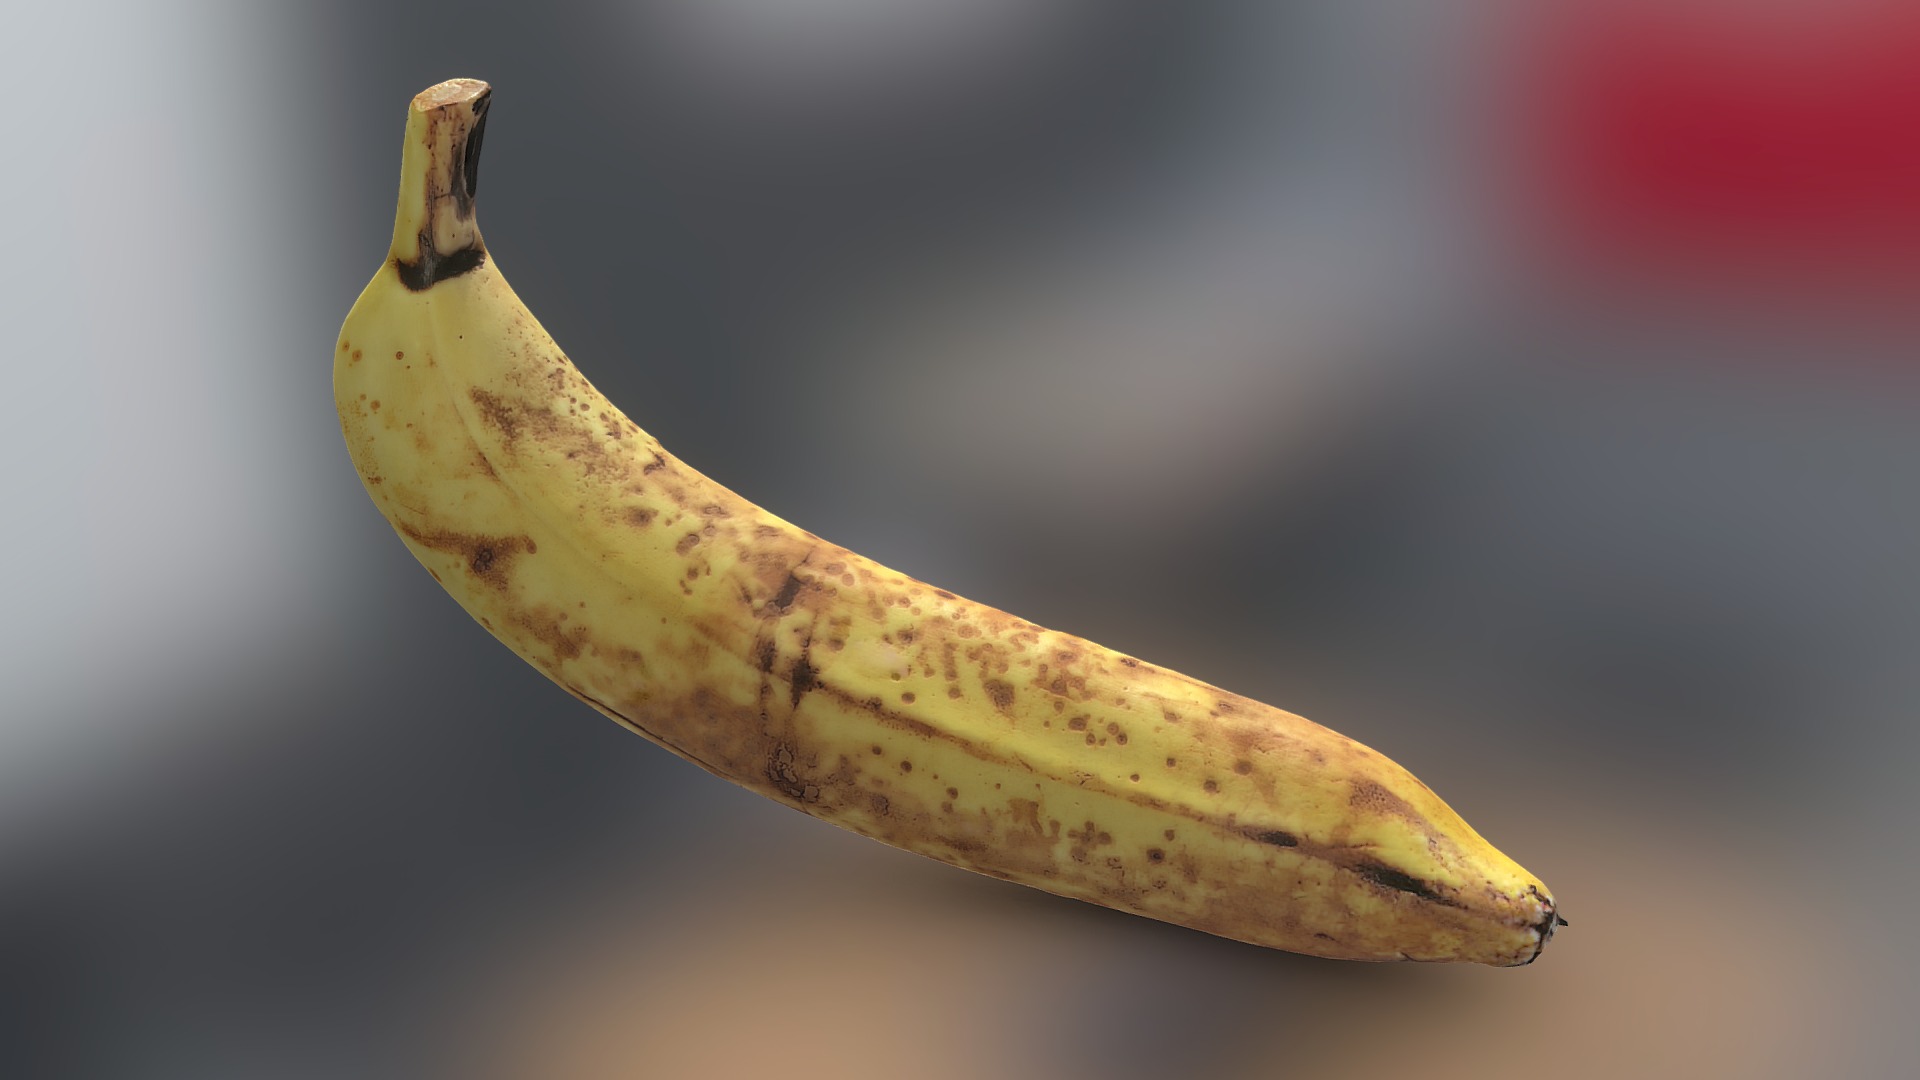 3D model Banana, Aged - This is a 3D model of the Banana, Aged. The 3D model is about a banana with a black background.